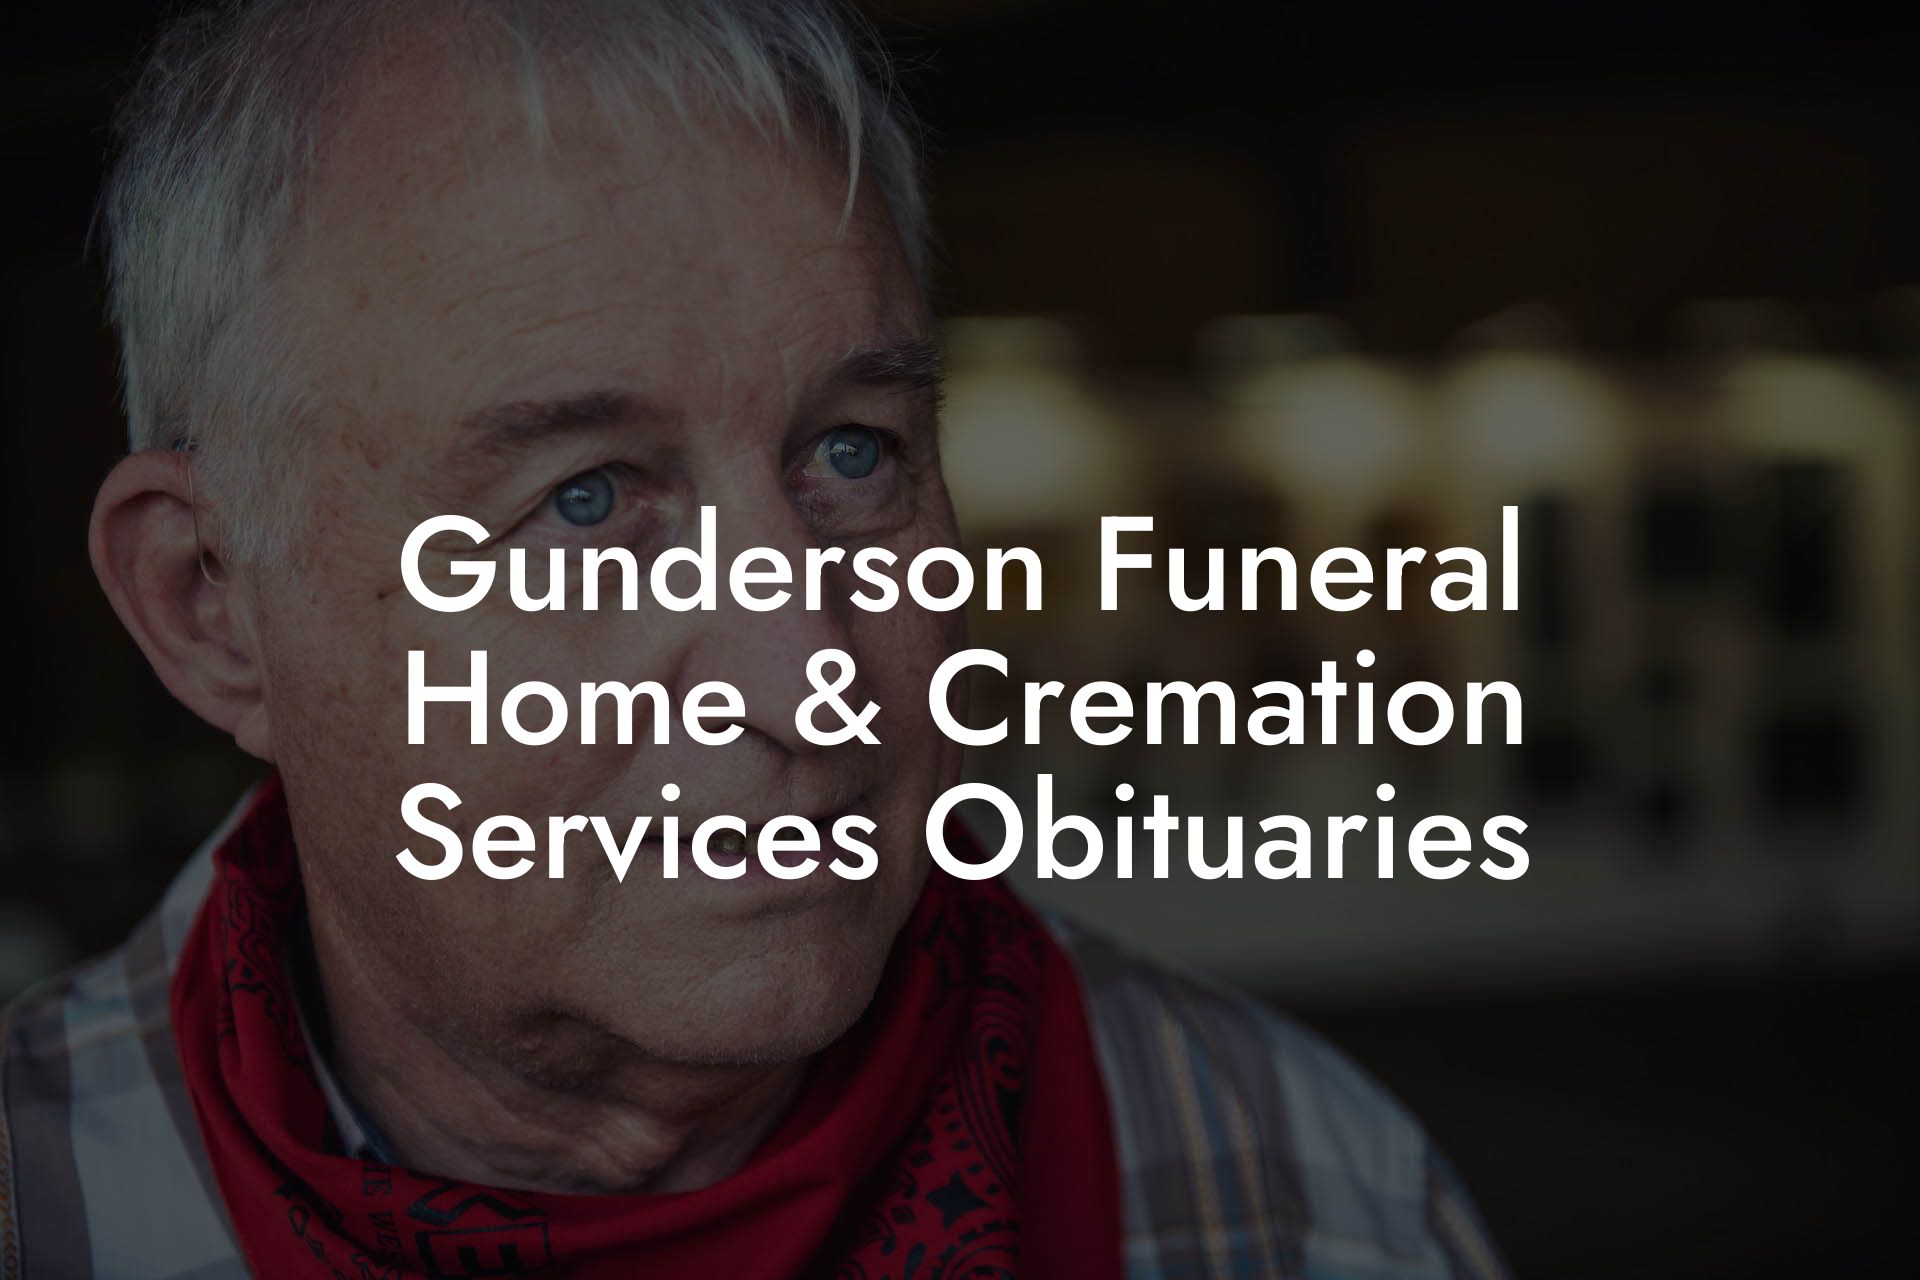 Gunderson Funeral Home & Cremation Services Obituaries